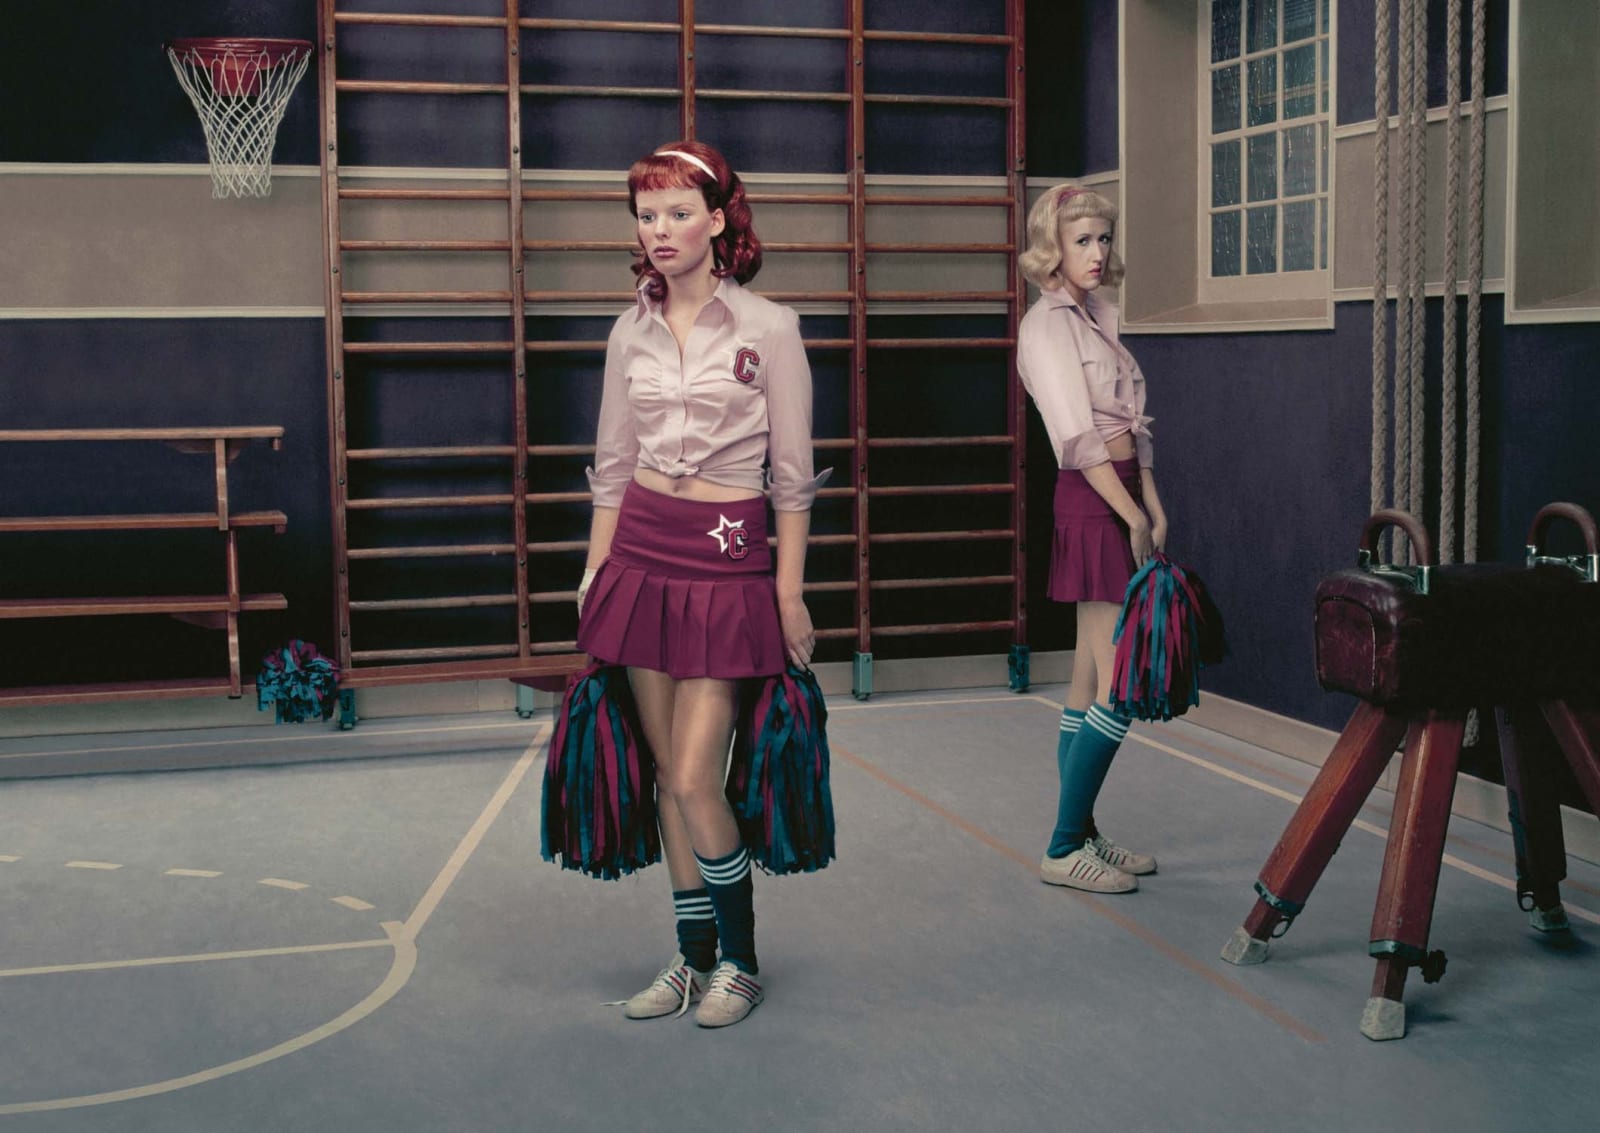 Two cheerleaders in gym by Erwin Olaf